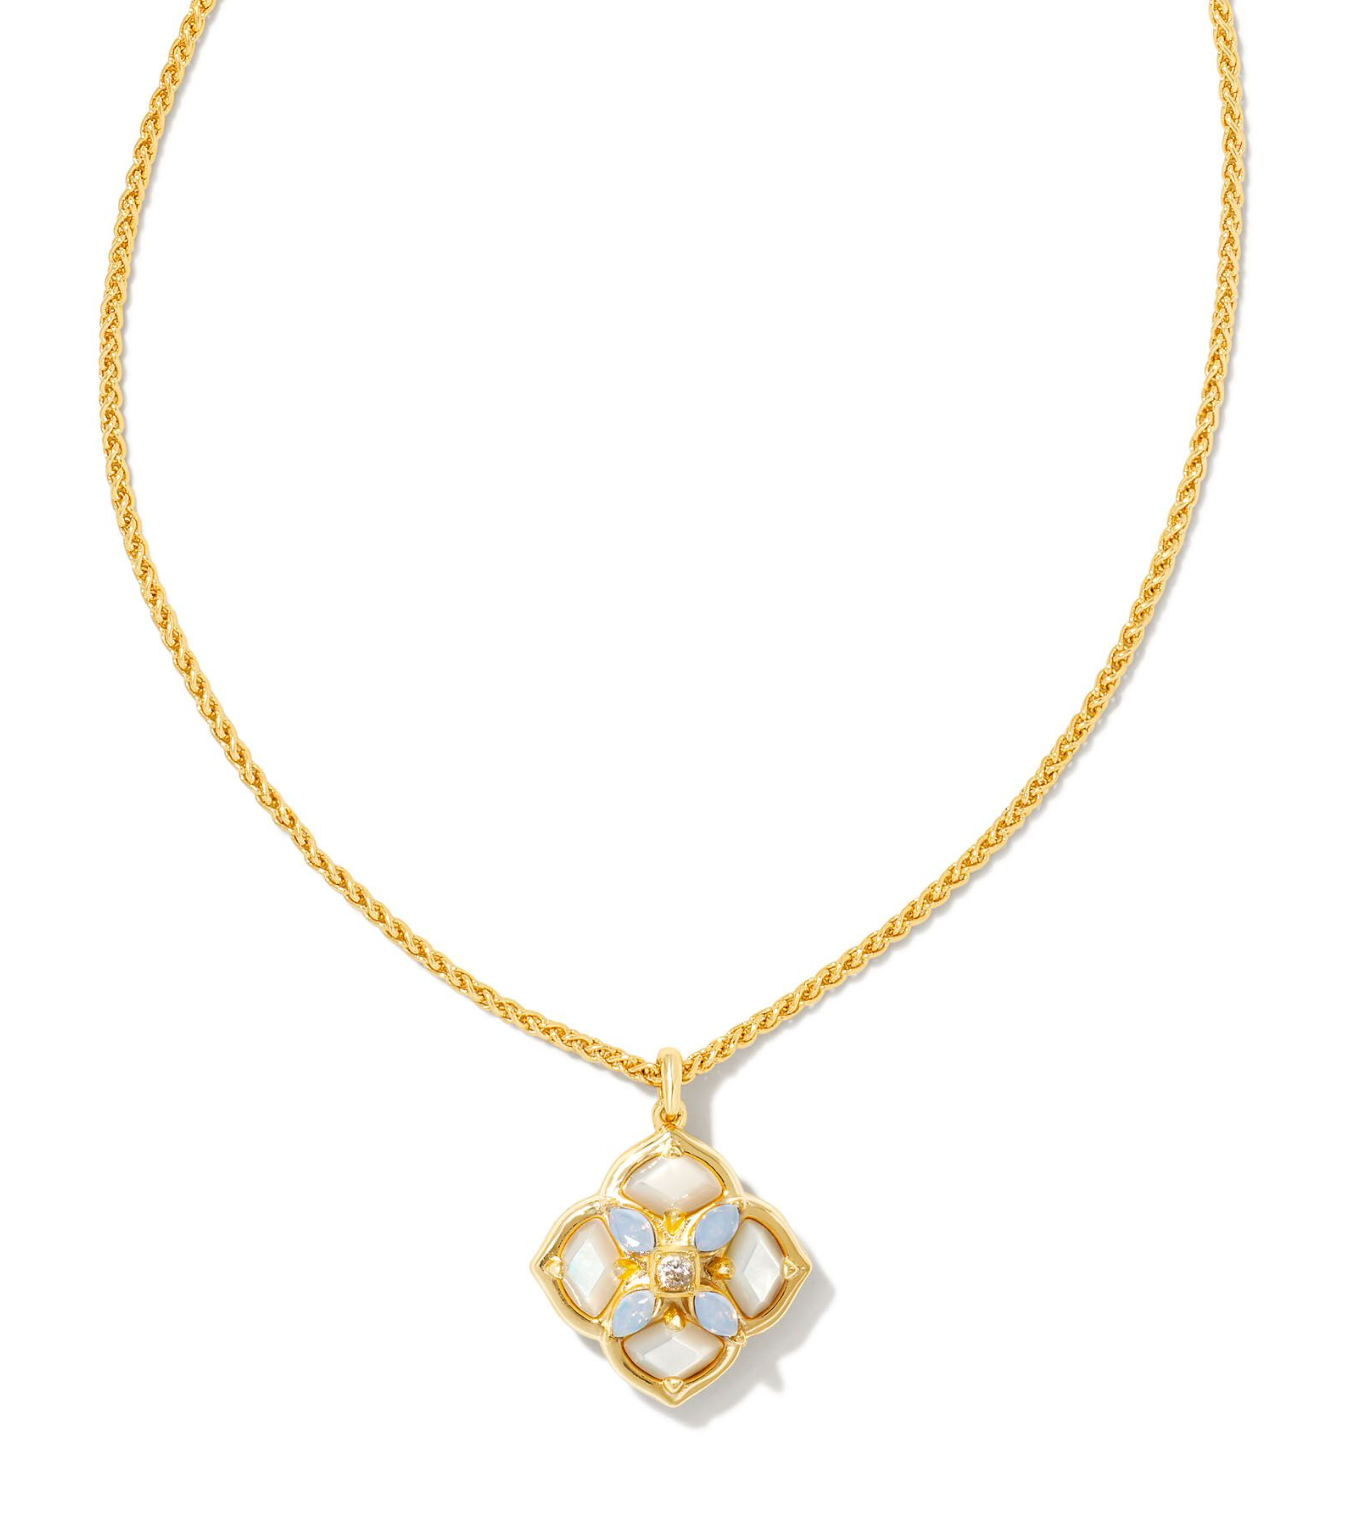 KENDRA SCOTT Dira Stone Gold Short Pendant Necklace in Ivory Mix - The Street Boutique 